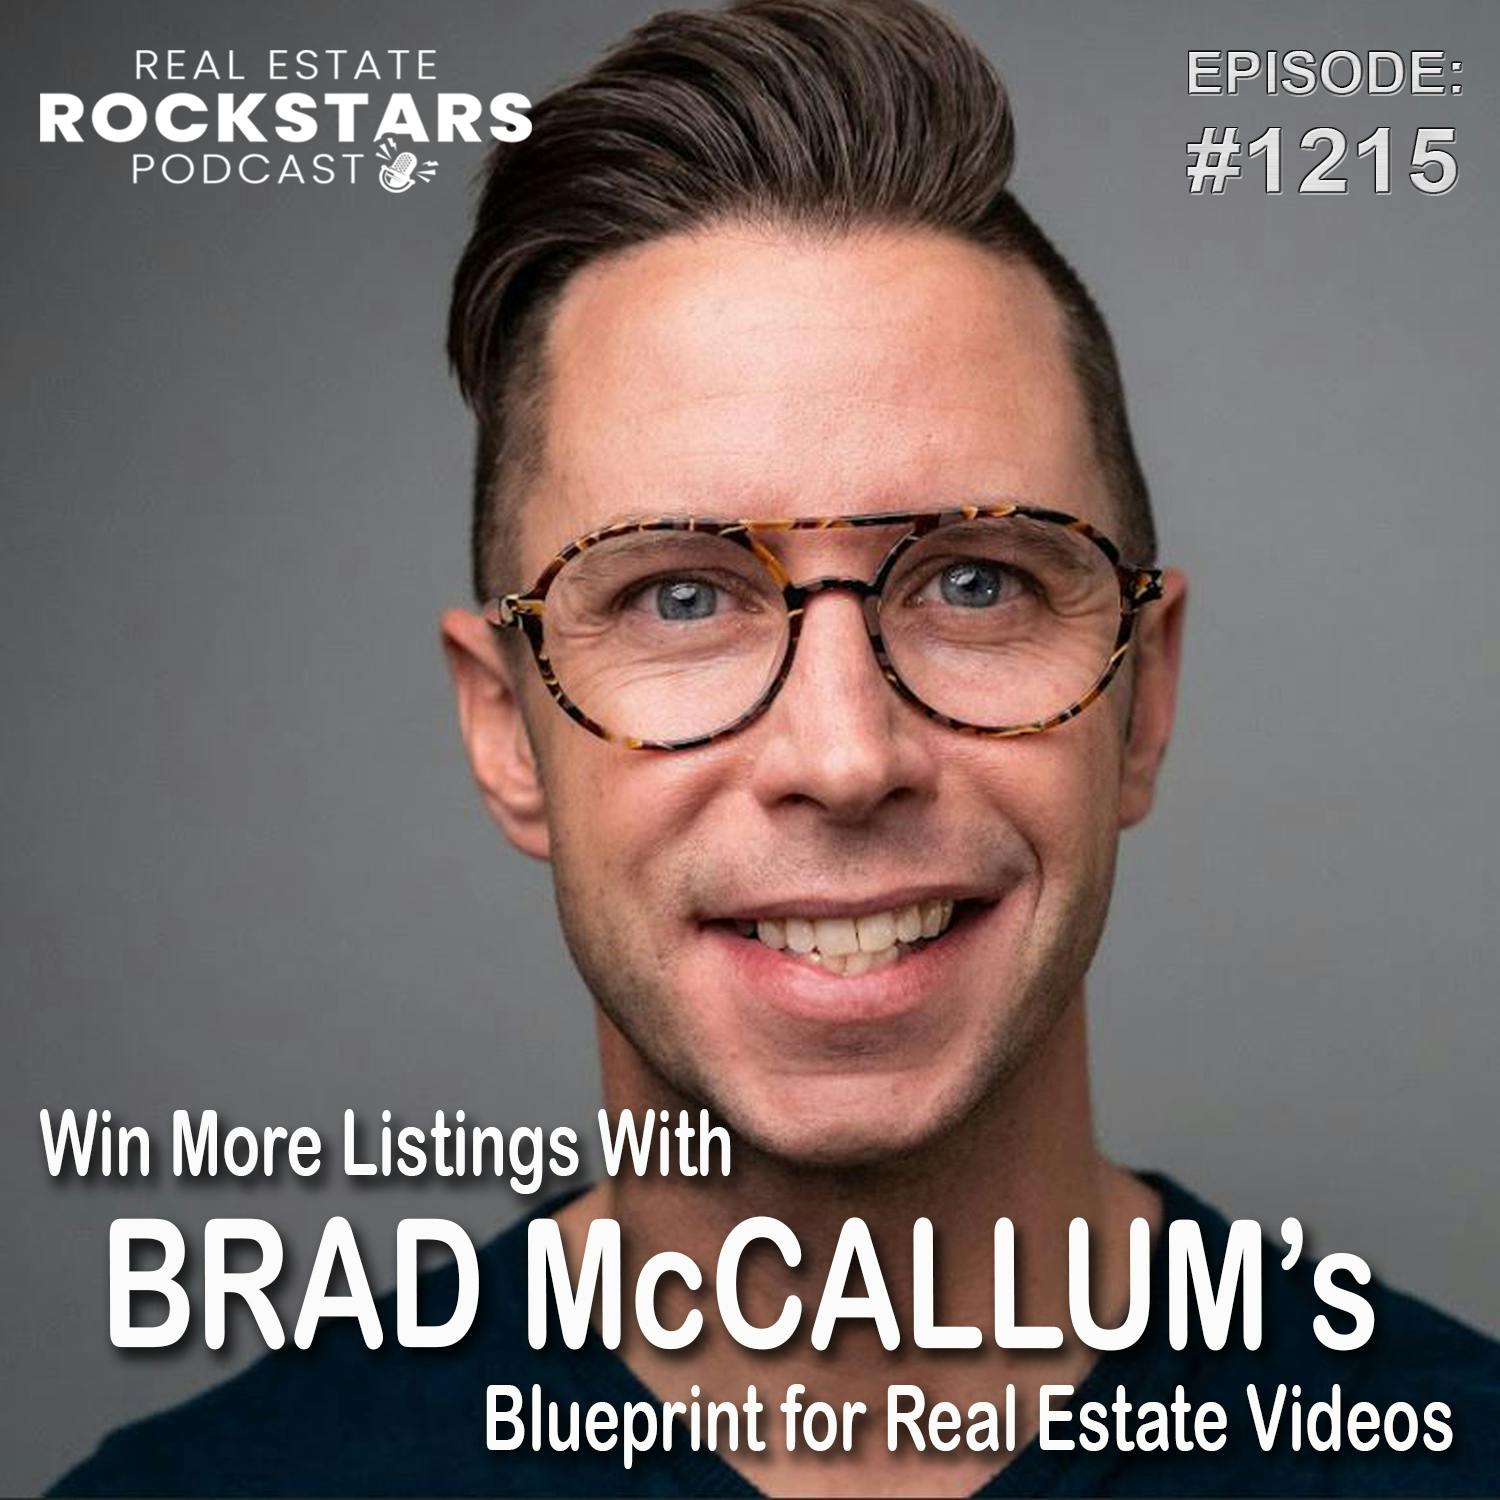 1215: Win More Listings With Brad McCallum’s Blueprint for Real Estate Videos